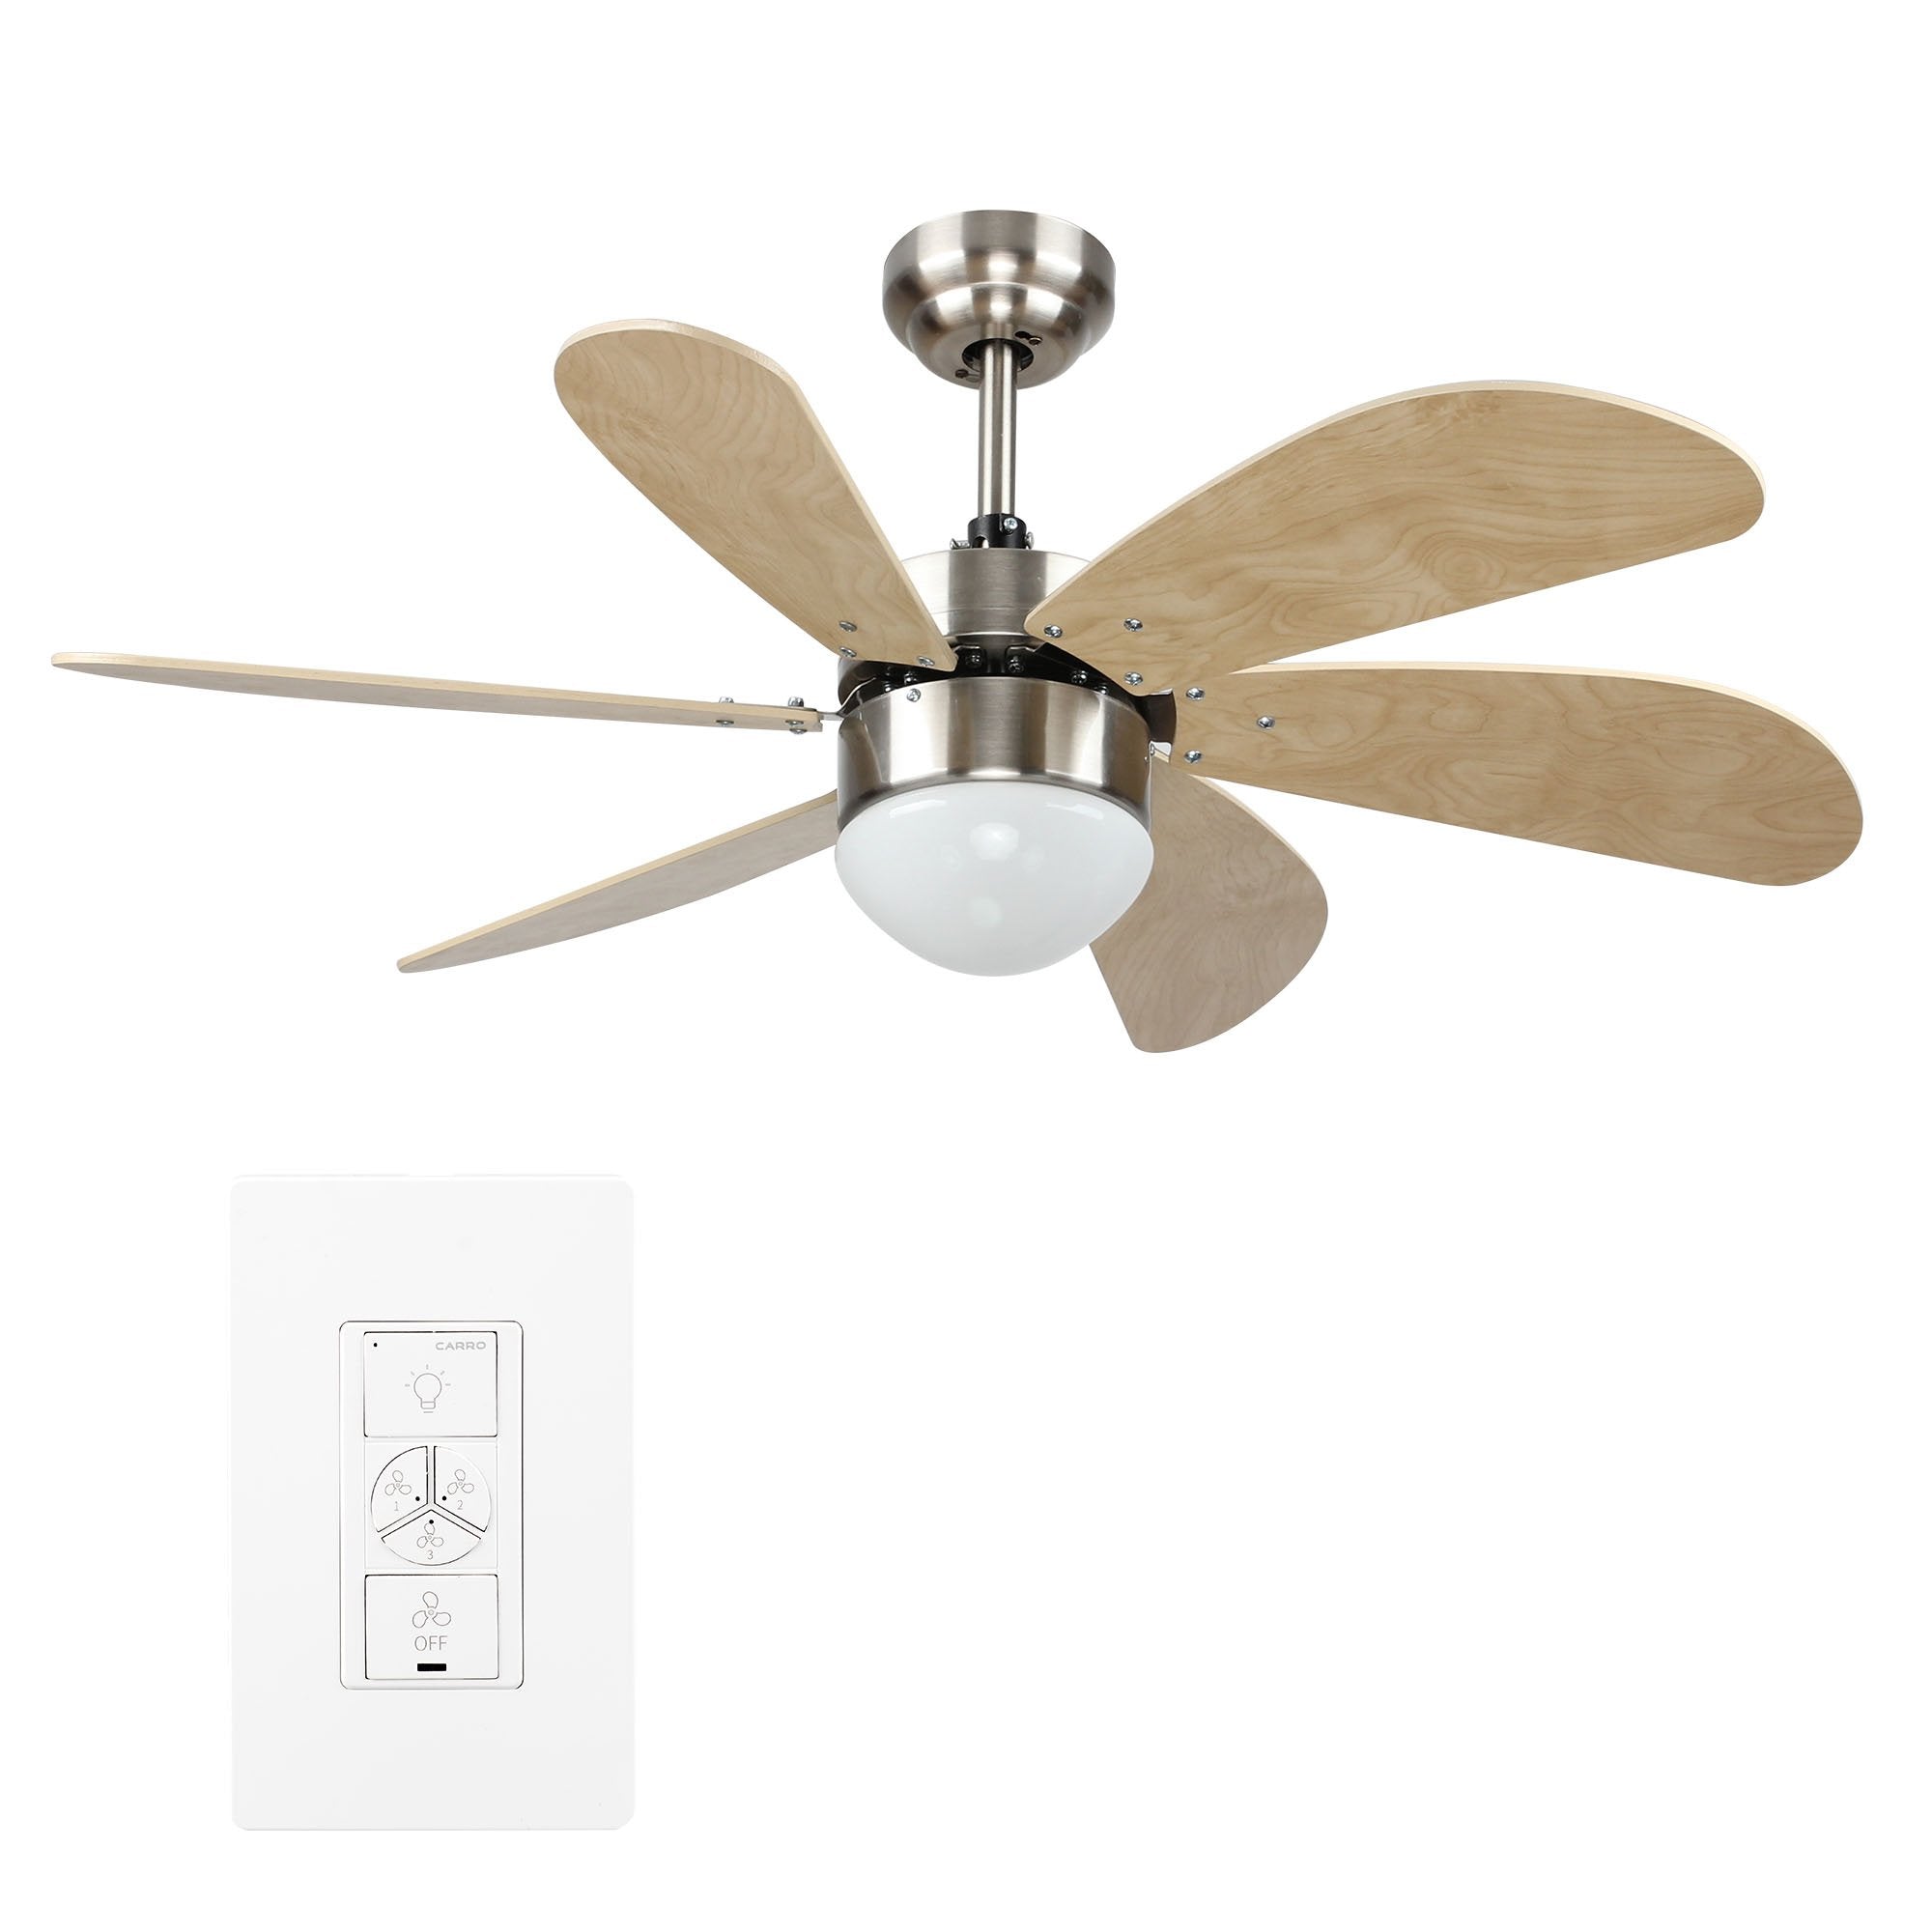 Minimus 38-inch Indoor Best Smart Ceiling Fan with Light Kit & Wall Control, Works with Alexa/Google Home/Siri